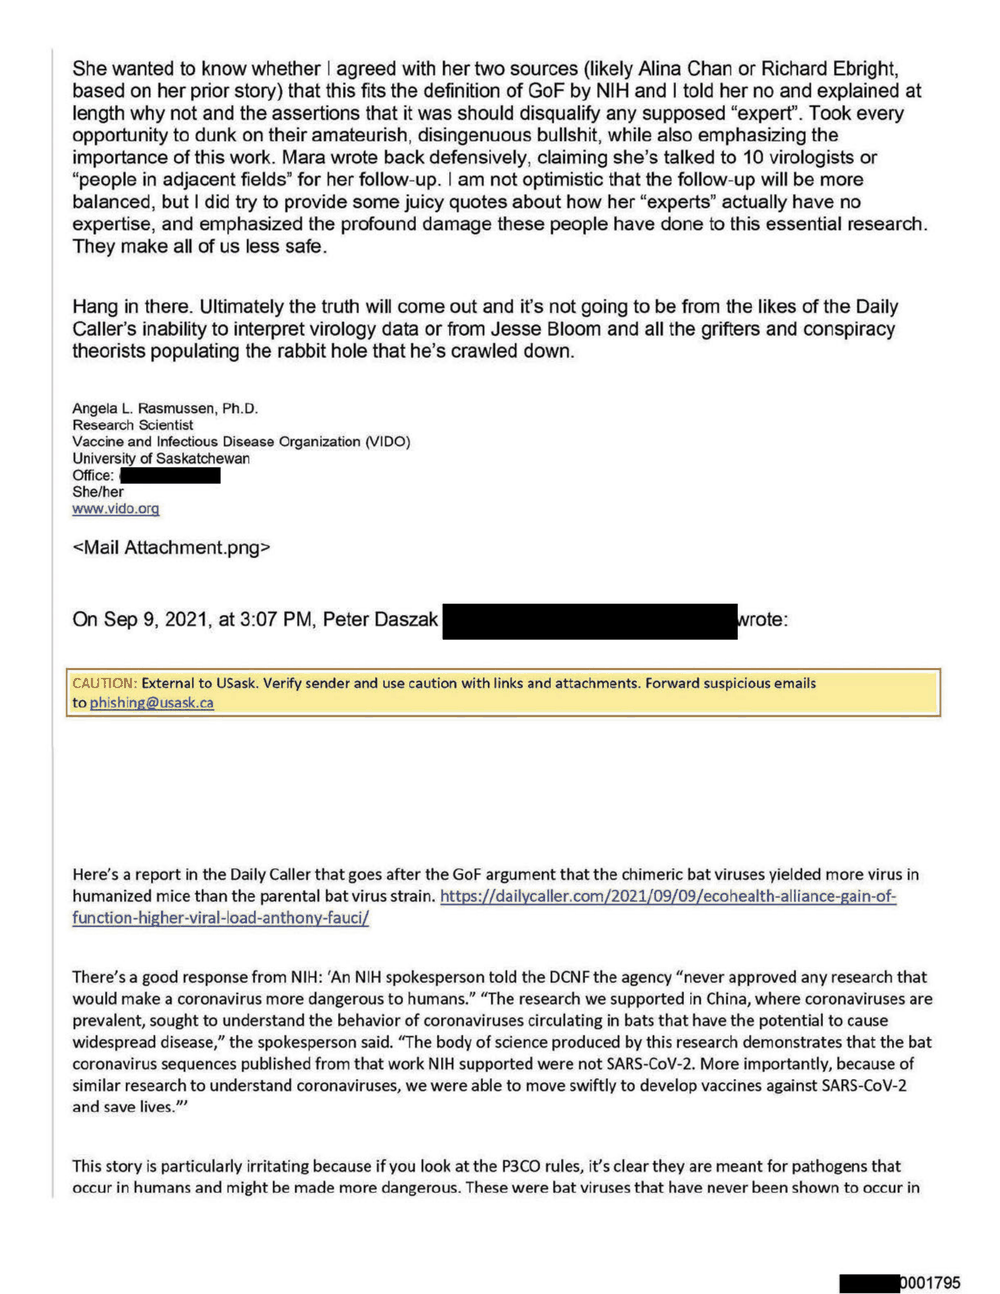 Page 22 from David Morens NIH Emails Redacted